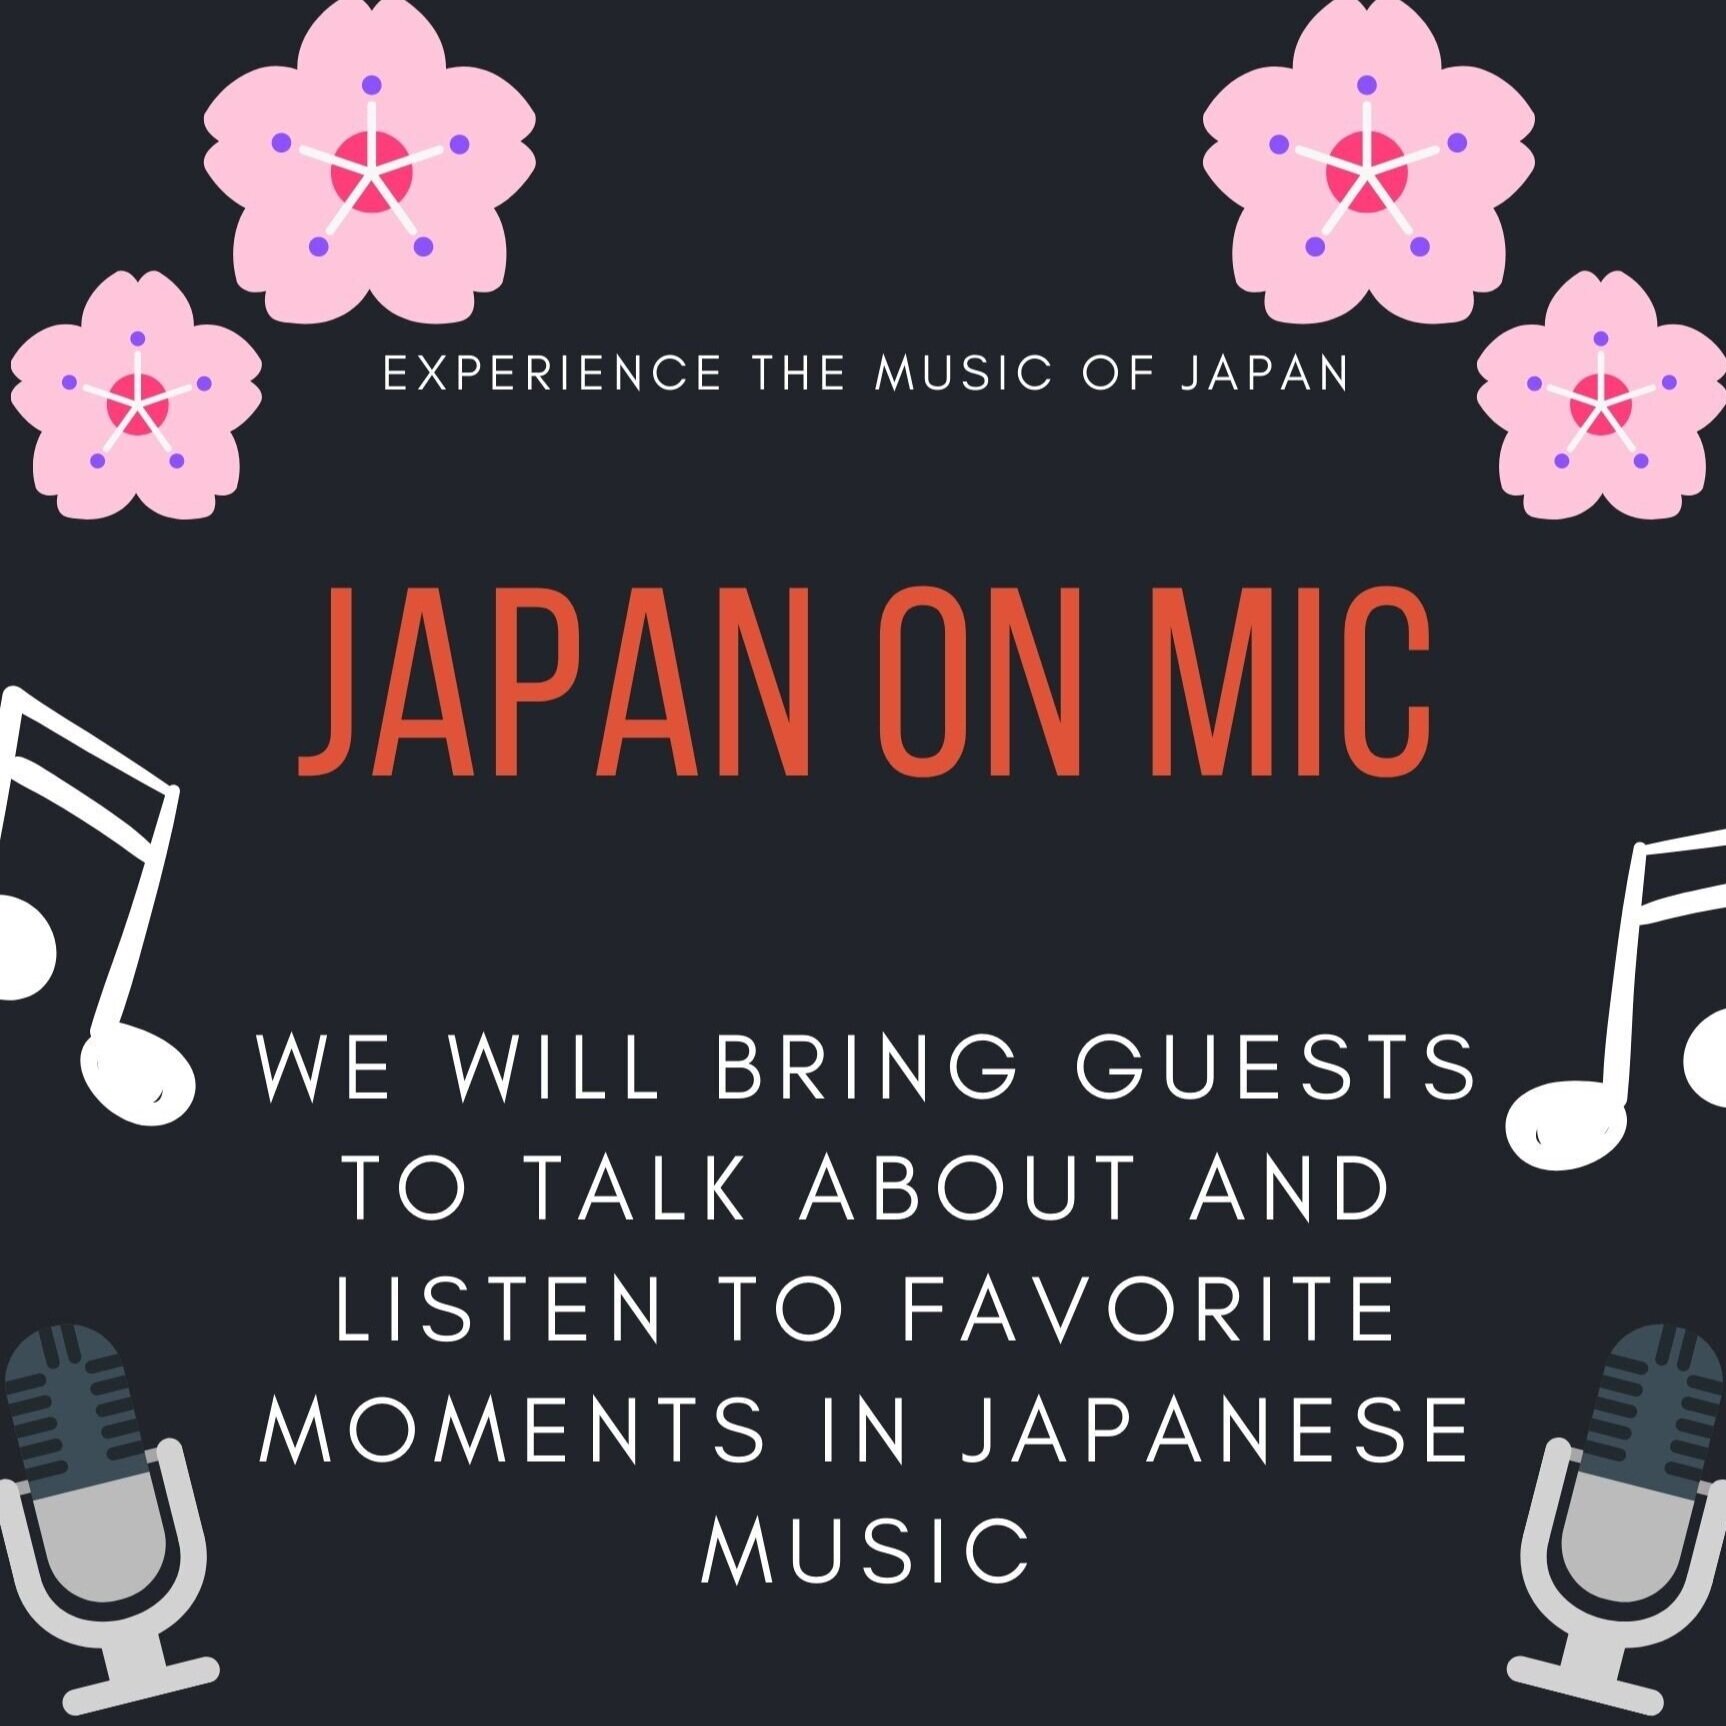 Japan on Mic event poster. (Photo courtesy of Koji Wittmer)